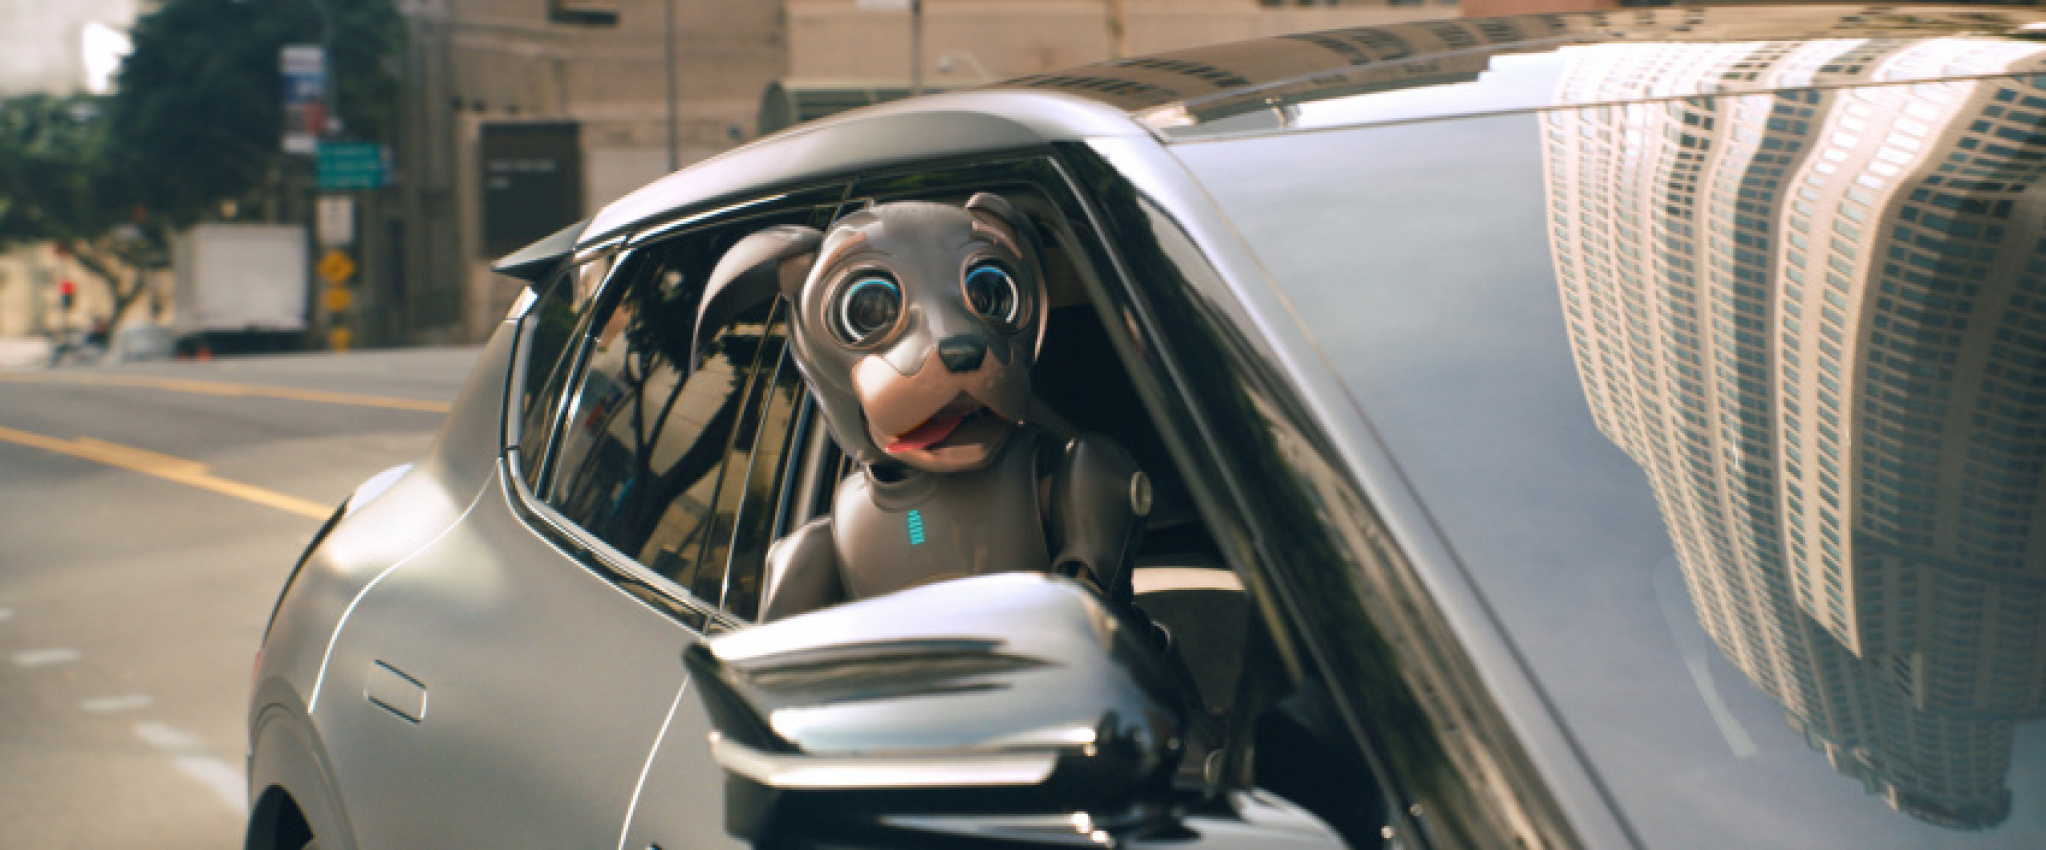 autos, cars, electric cars, kia, technology, kia america, petfinder foundation, robo dog, russell wager, toni morgan, kia america returns to the super bowl with spot featuring the all-electric kia ev6 (and a robo dog)